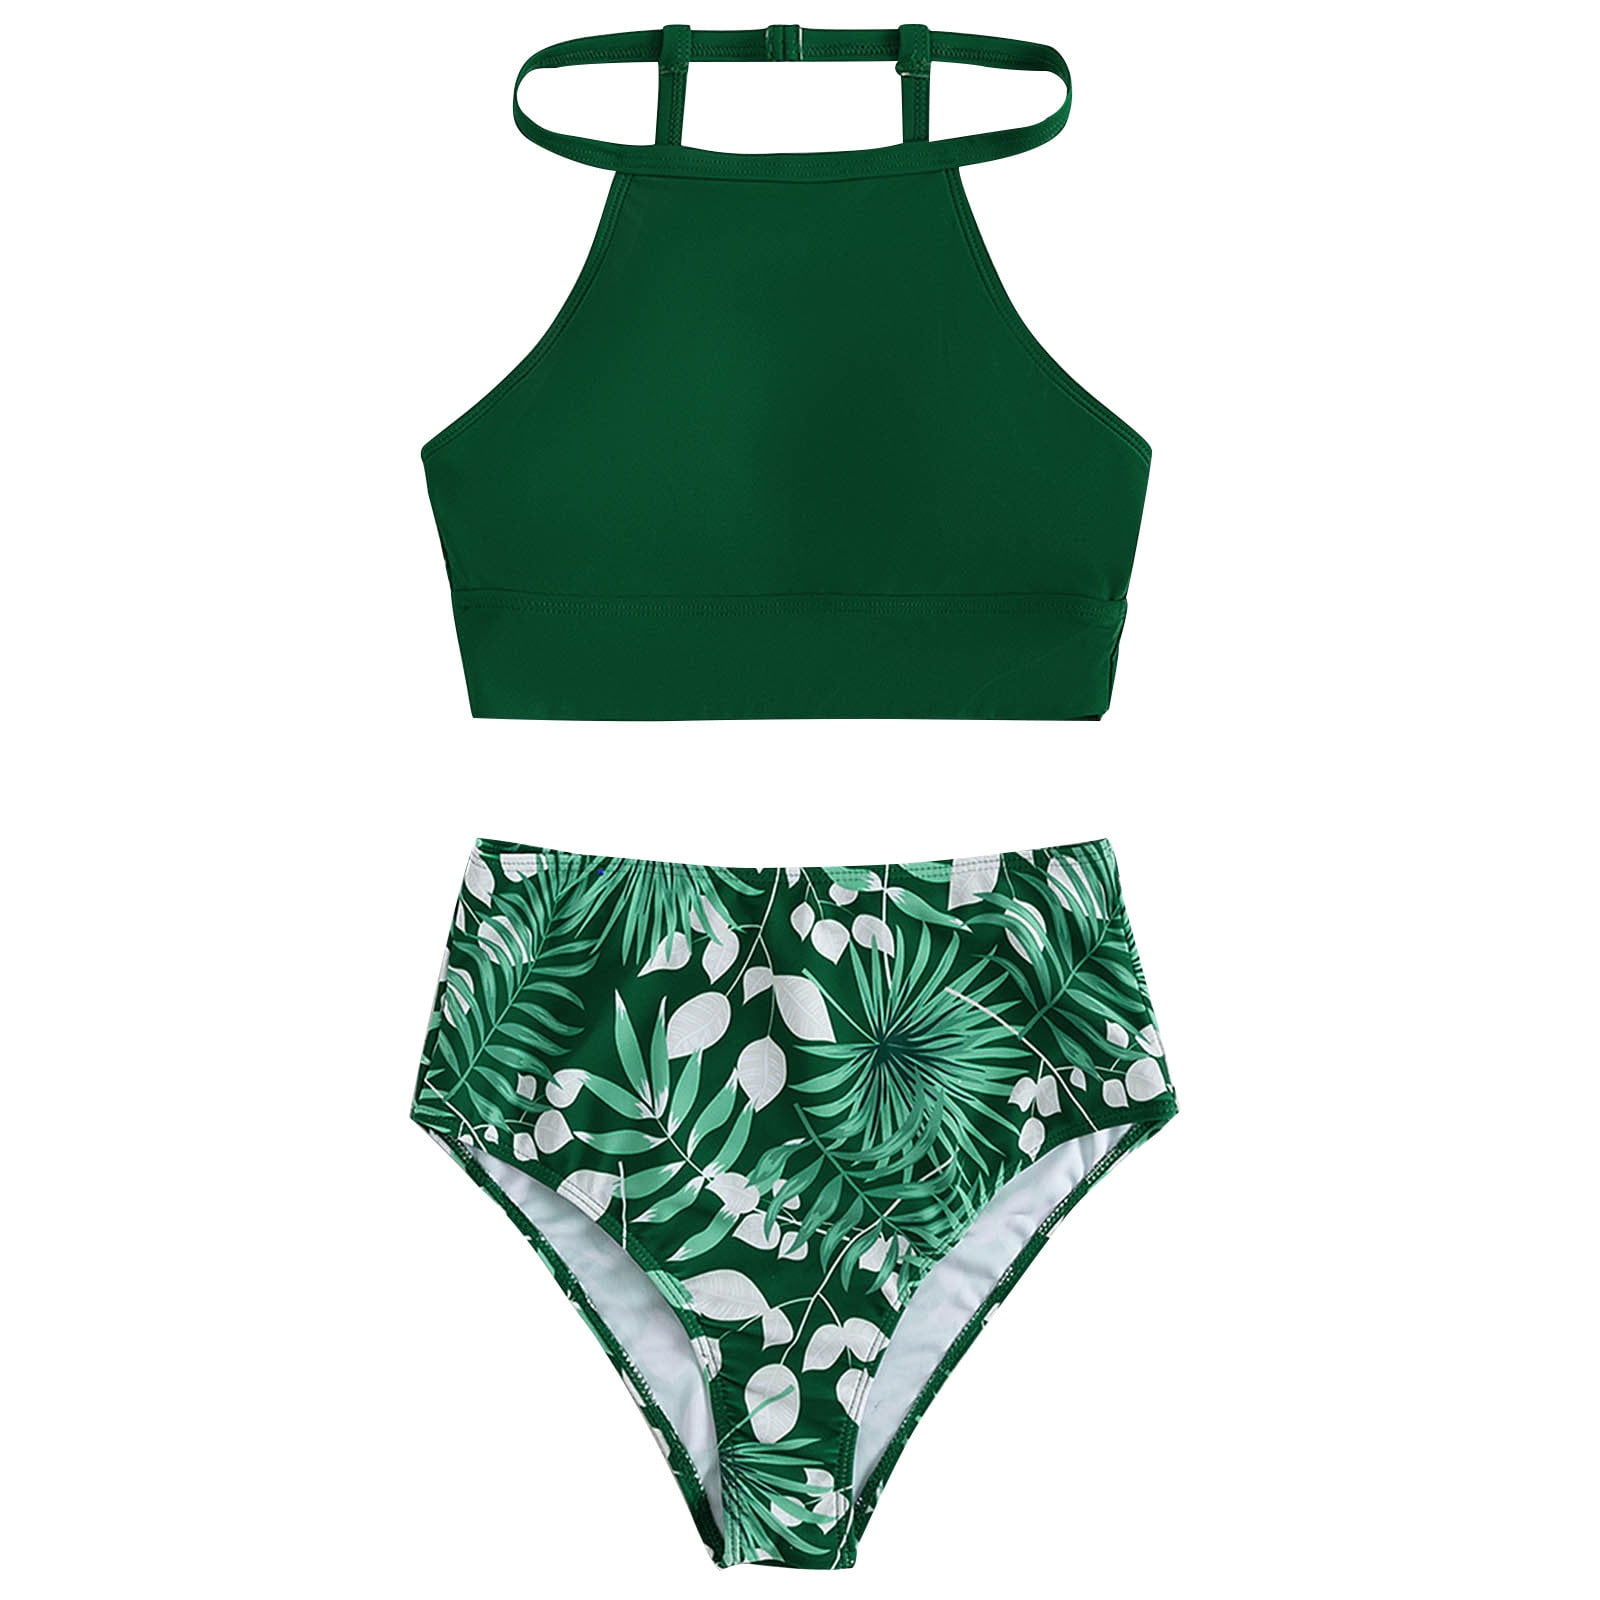 Leolines, LLC ™ FOREST GREEN 2-piece Bathing Suit Made for